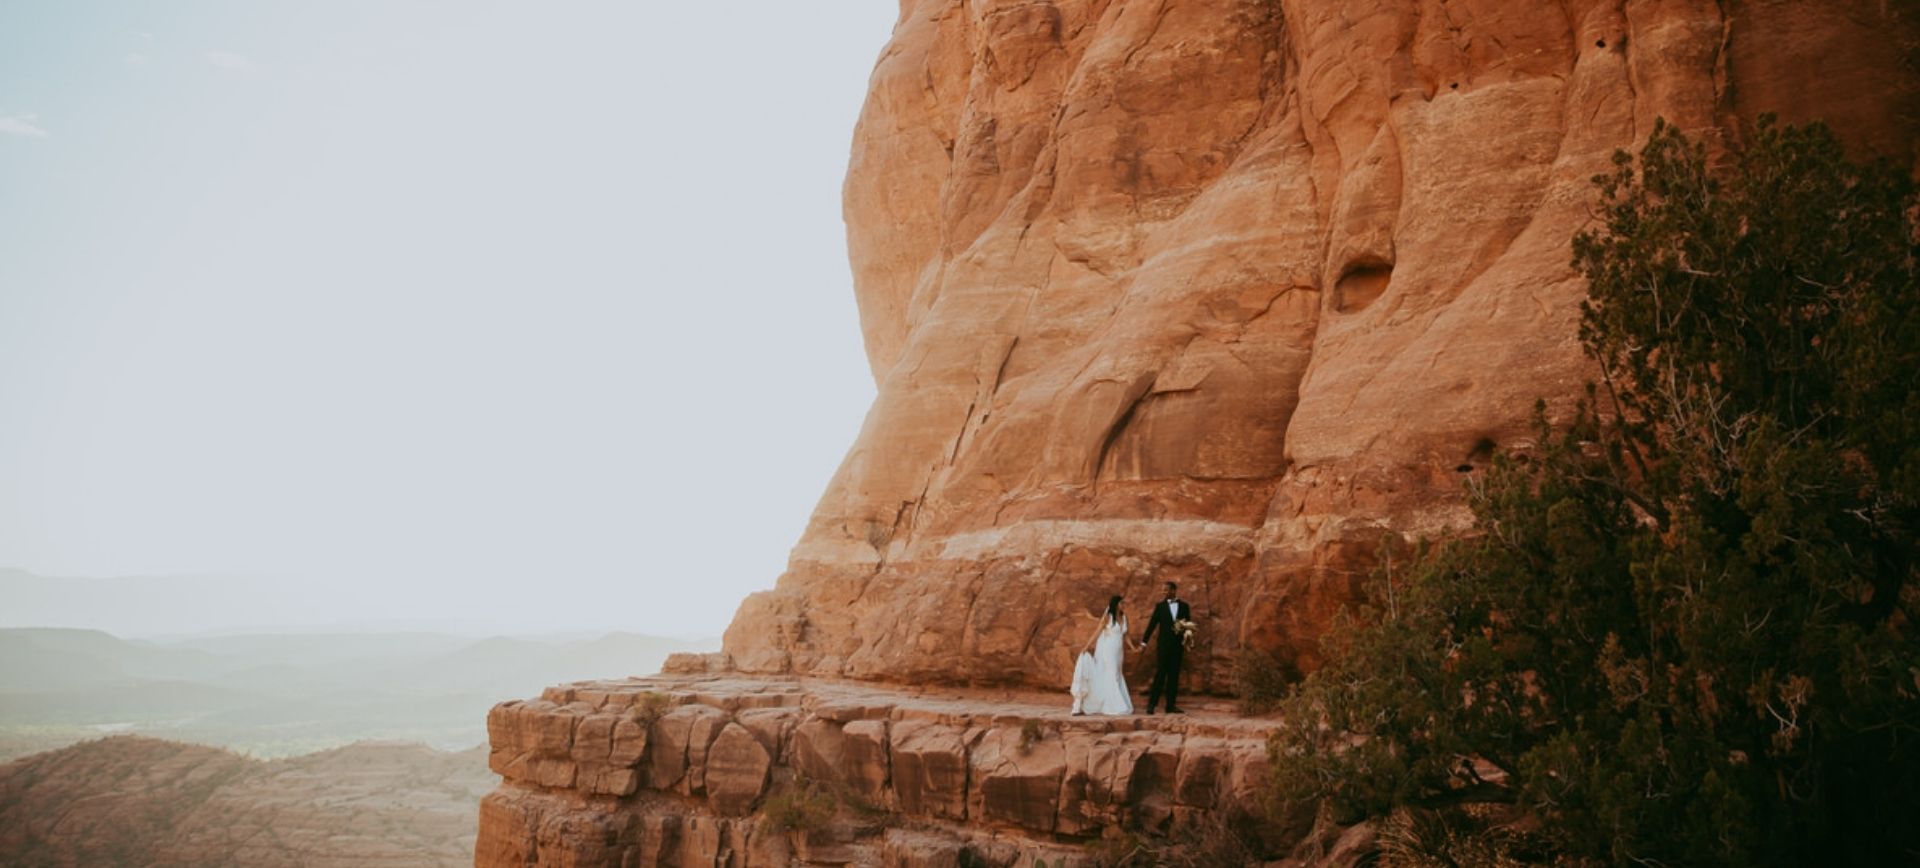 intimate wedding package in arizona - sedona elopement at cathedral rock